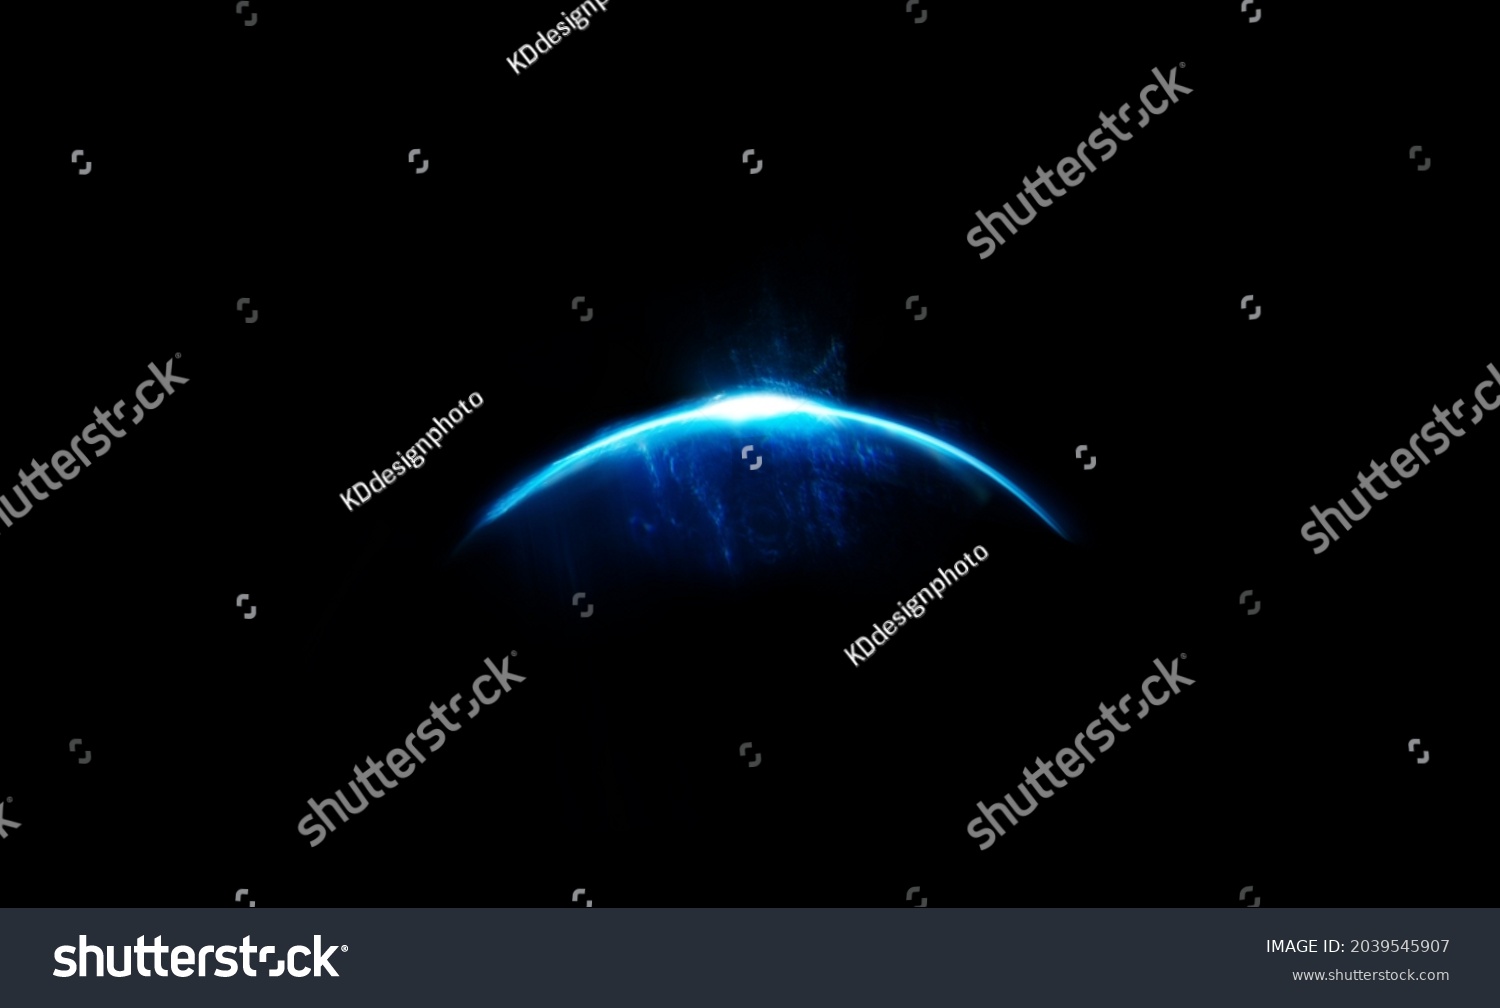 Easy to add lens flare effects for overlay designs or screen blending mode to make high-quality images. Abstract sun burst, digital flare, iridescent glare over black background. #2039545907